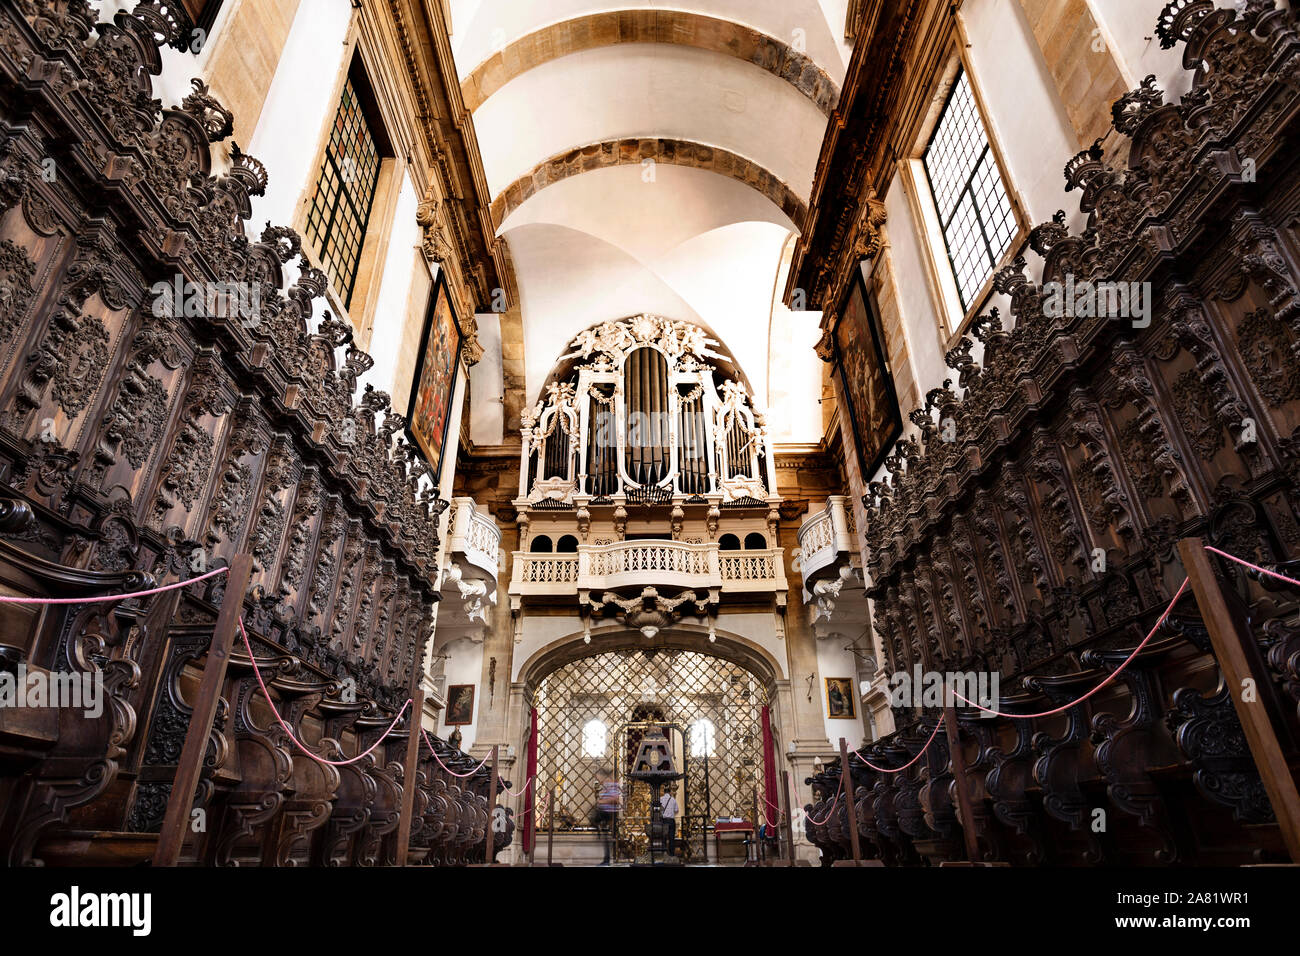 View of the spectacular Brazilian black rosewwod and walnut wood grand chair, in the choir of the Monastery of Saint Mary of Lorvao, Coimbra, Portugal Stock Photo